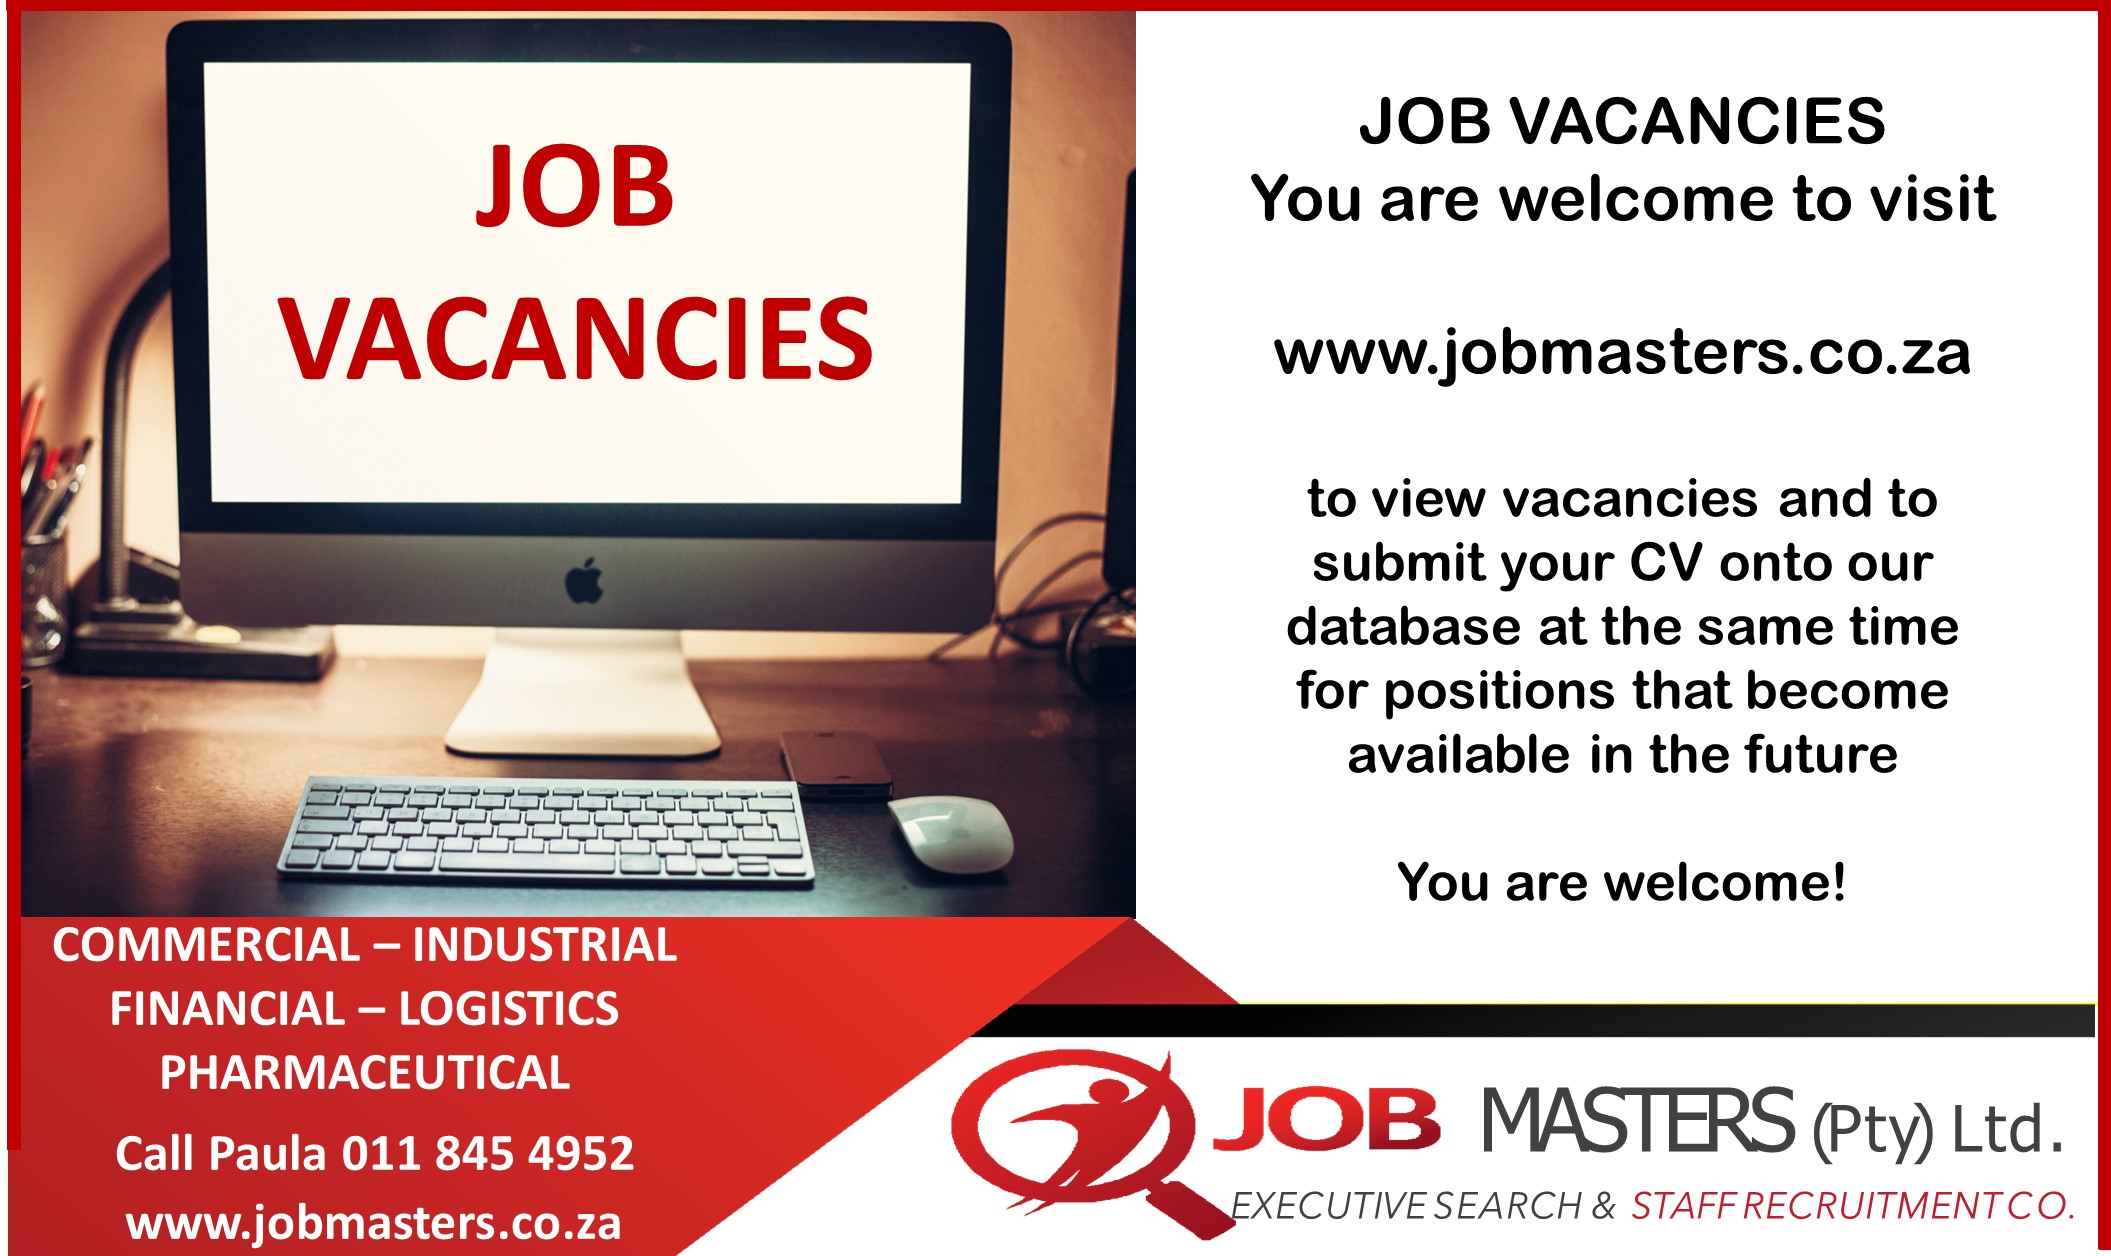 JOB
VACANCIES

COMMERCIAL — INDUSTRIAL
FINANCIAL —- LOGISTICS
PHARMACEUTICAL
Call Paula 011 845 4952
www.jobmasters.co.za

JOB VACANCIES
You are welcome to visit

www.jobmasters.co.za

to view vacancies and to
submit your CV onto our
database at the same time
for positions that become
available in the future

You are welcome!

JOB MASTERS (pty) Ltd.

 

XECUTIVE SEARCH &amp; STAFFRECRUITMENTCO.